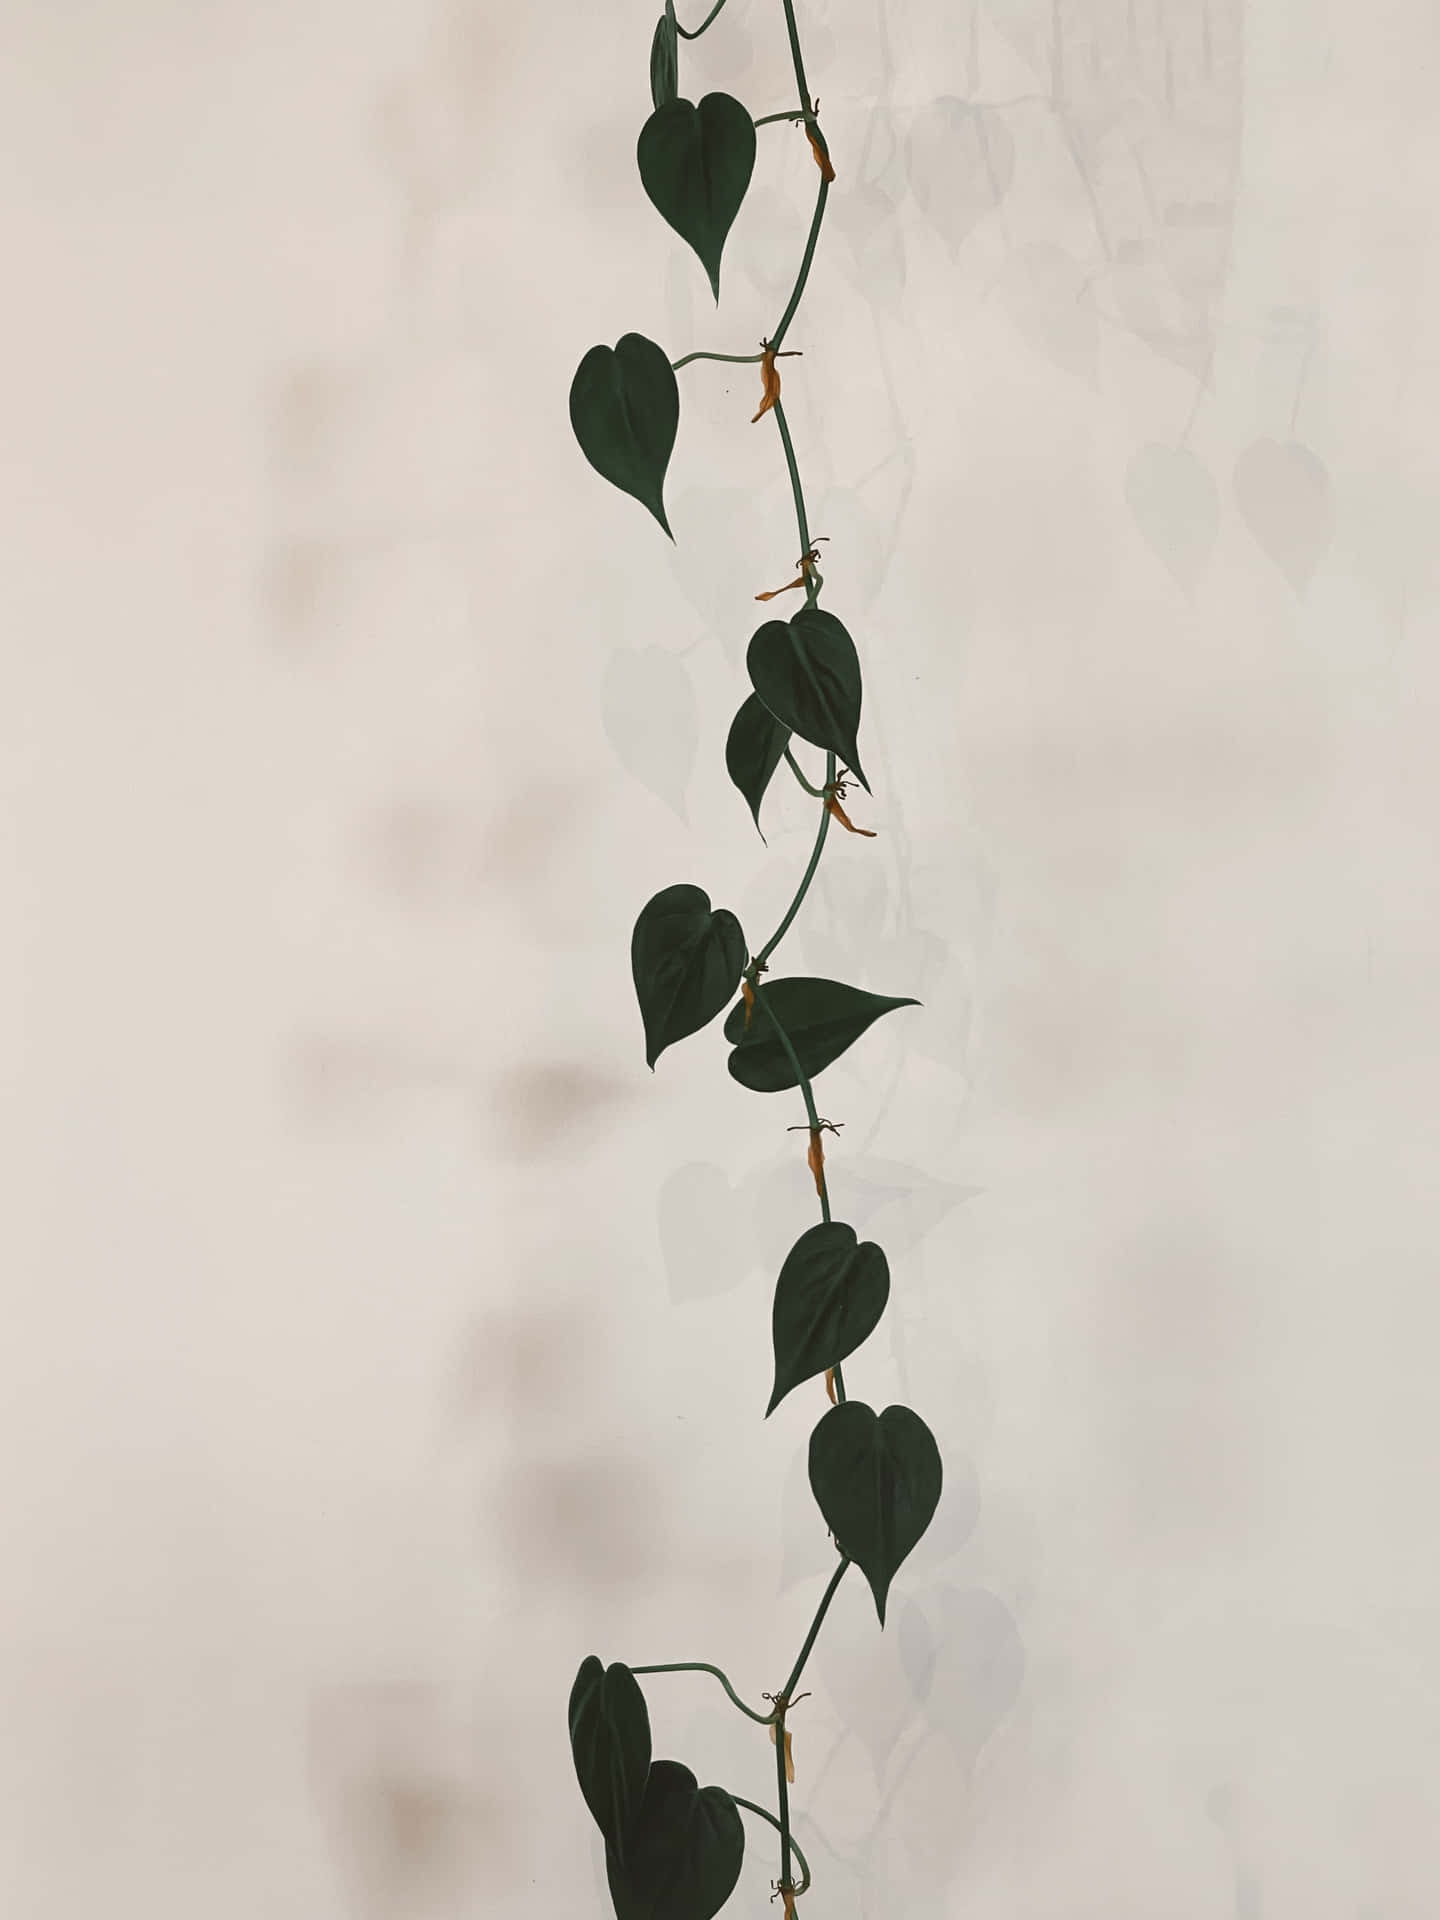 A Hanging Plant With Leaves On It